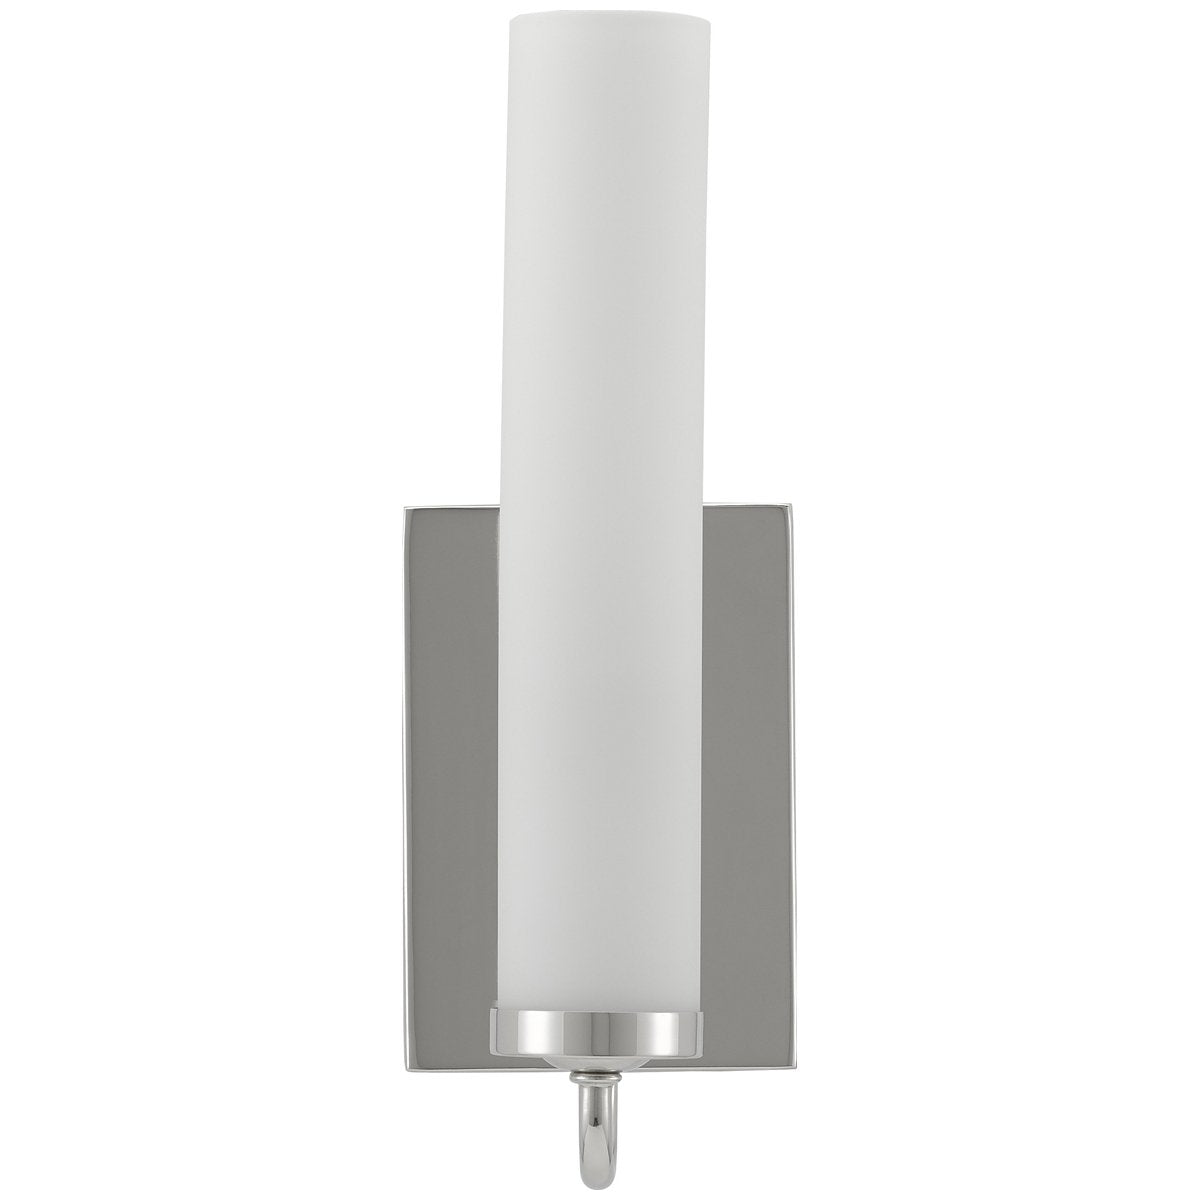 Currey and Company Brindisi Wall Sconce